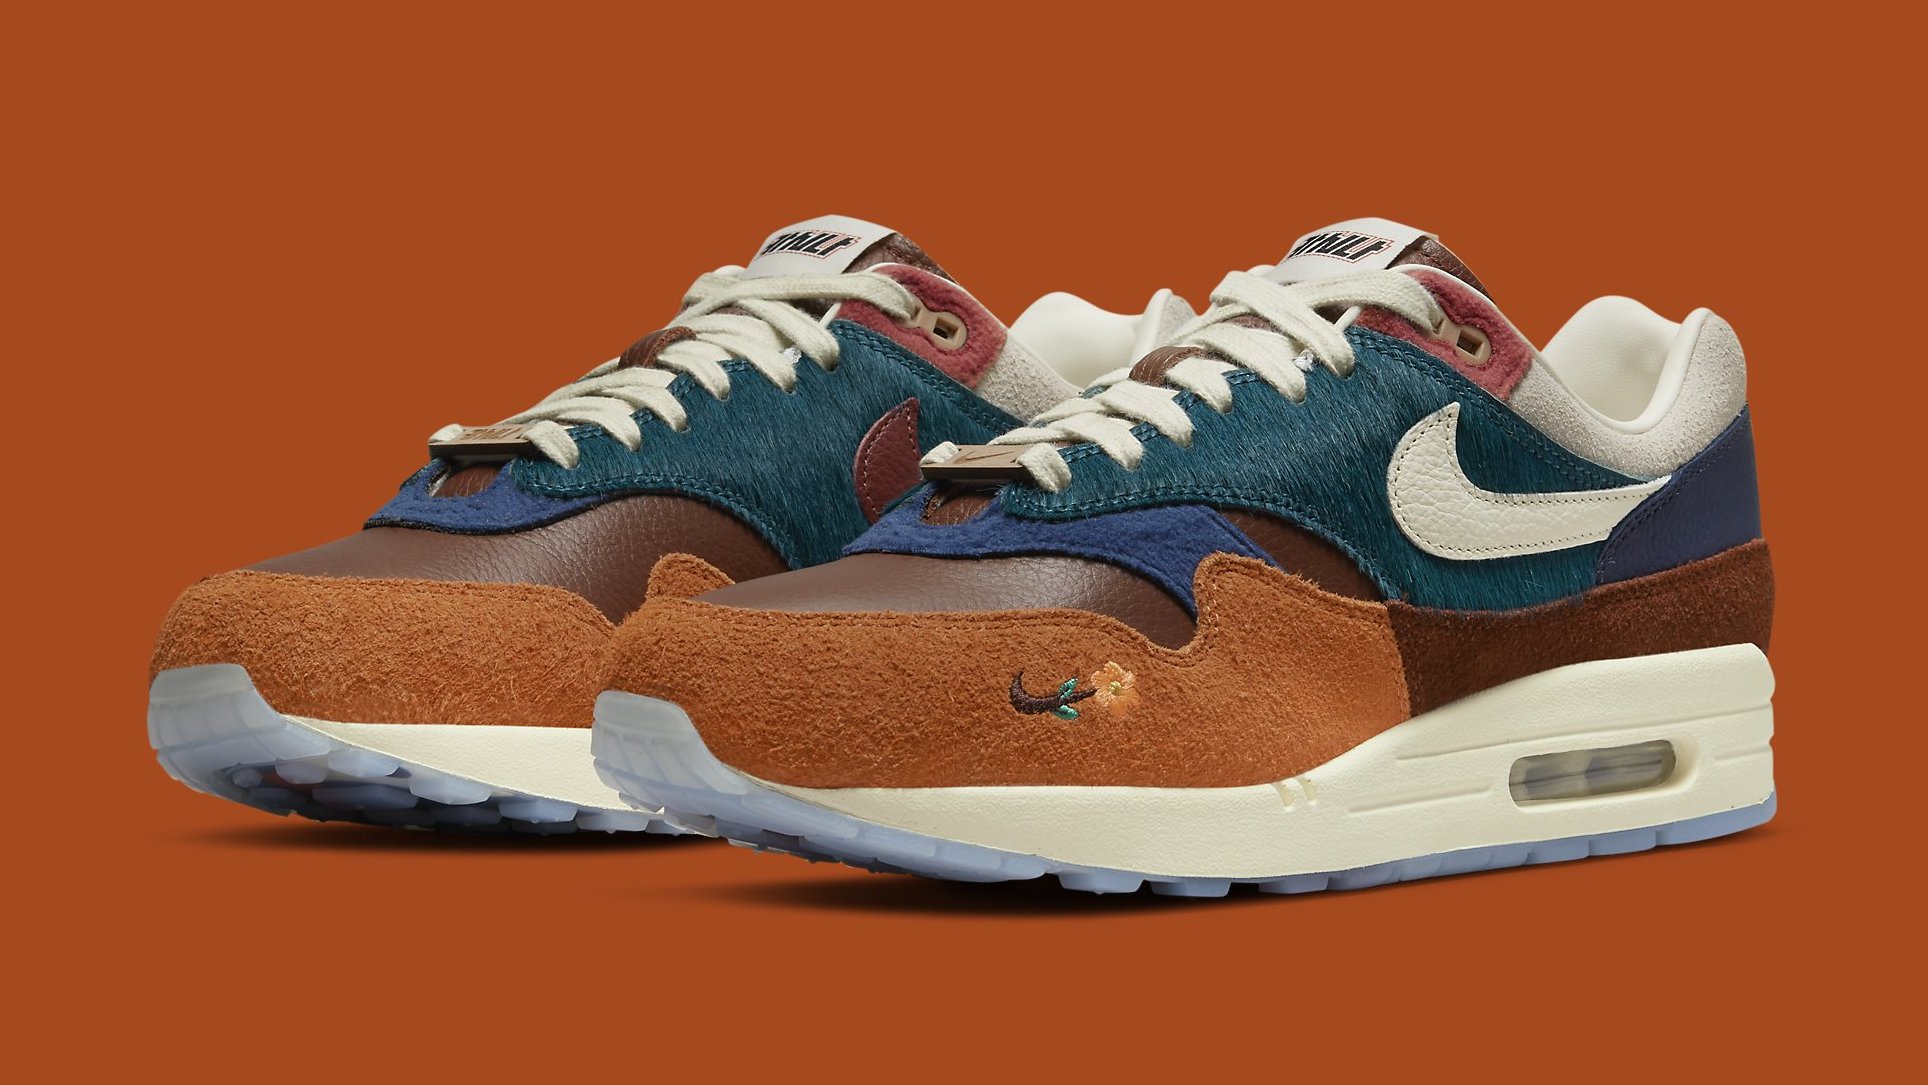 Dragende cirkel woensdag Anemoon vis Kasina x Nike Air Max 1 Collab Release Date June 2022 | Sole Collector